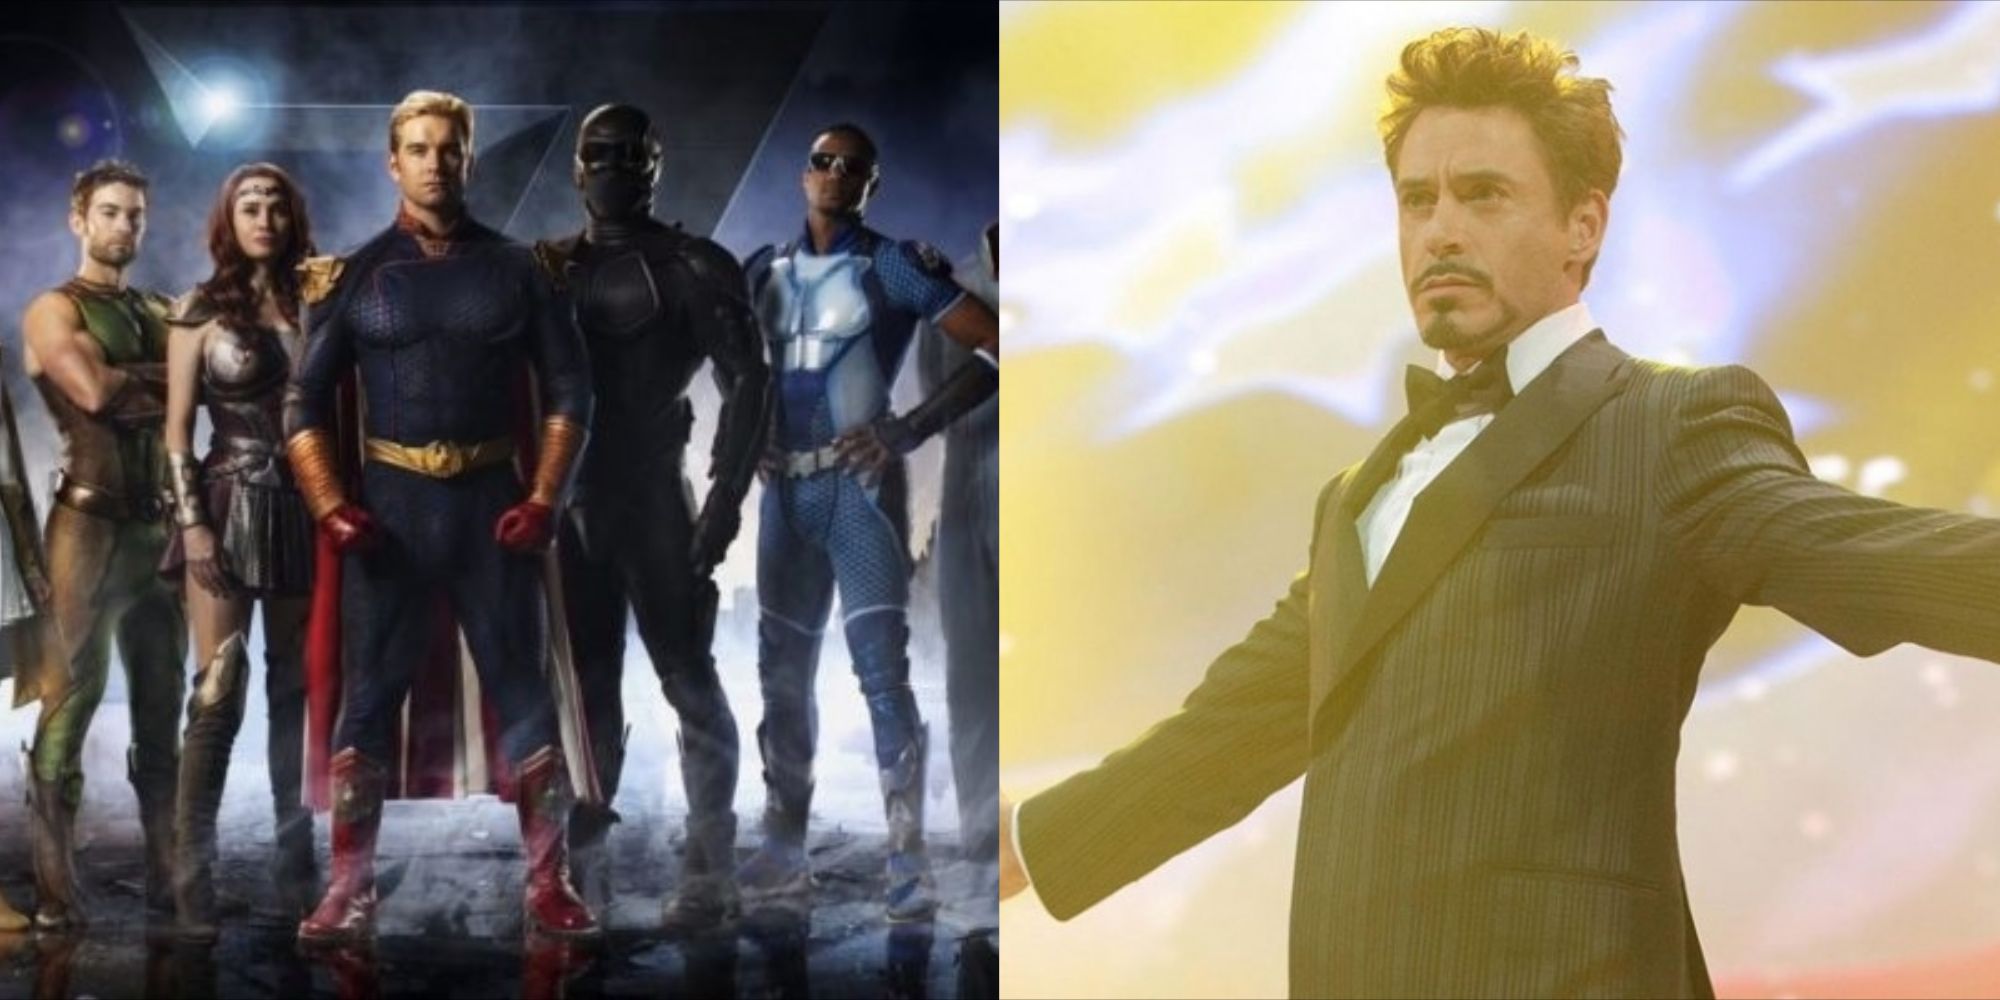 A split image of The Boys and Tony Stark with his arms out